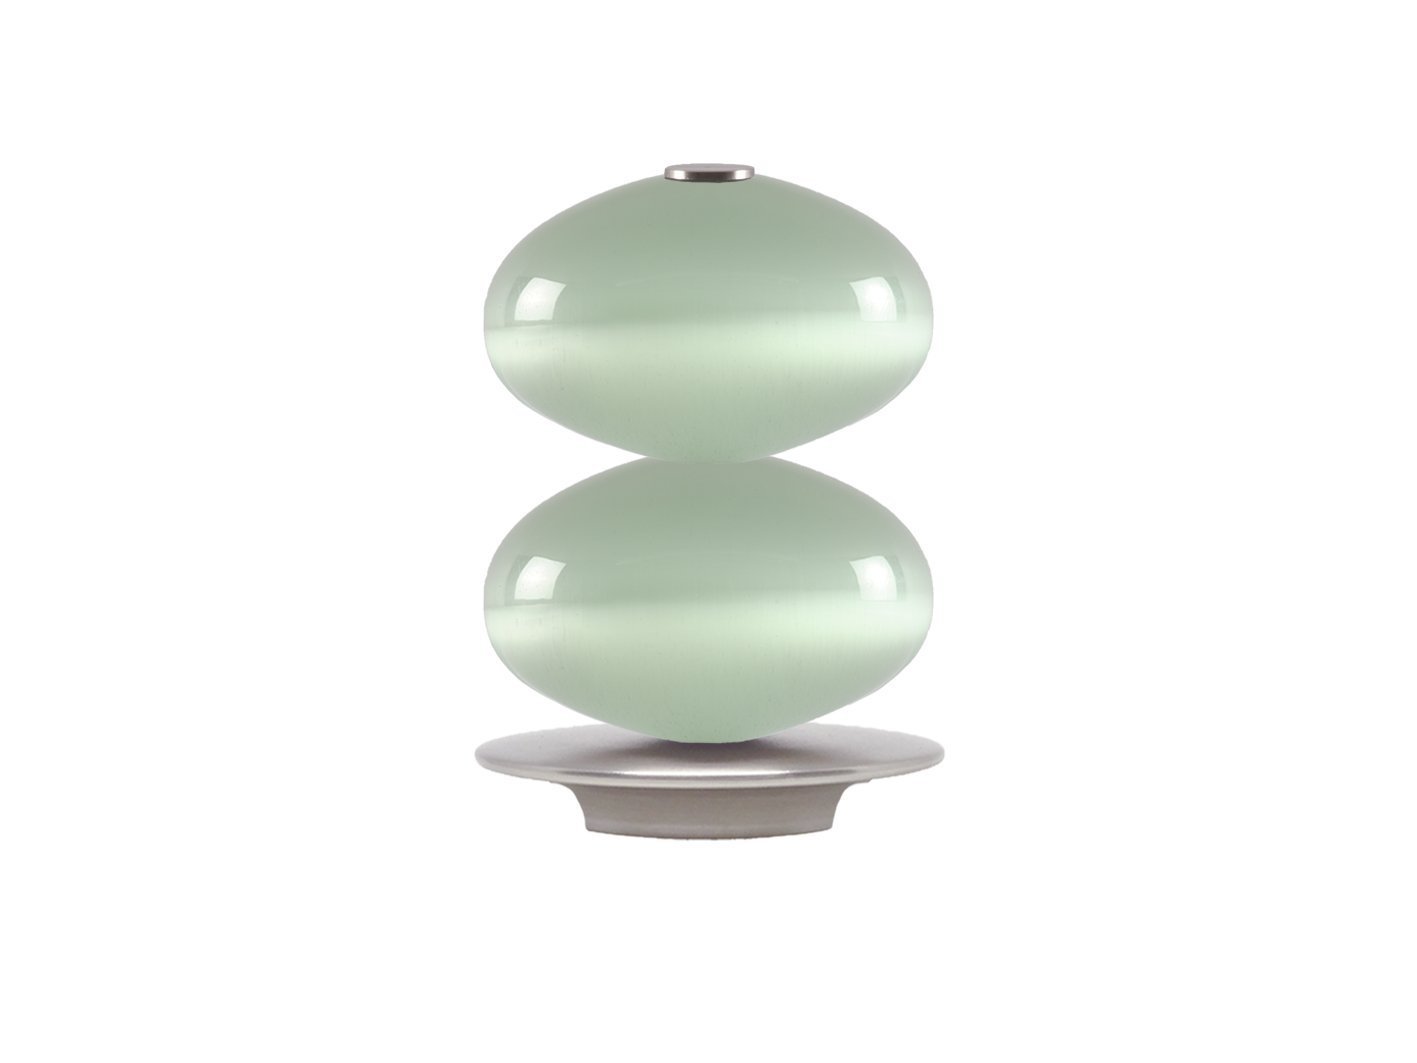 Glass double moonstone finial with stainless steel collar for 30mm dia. curtain poles